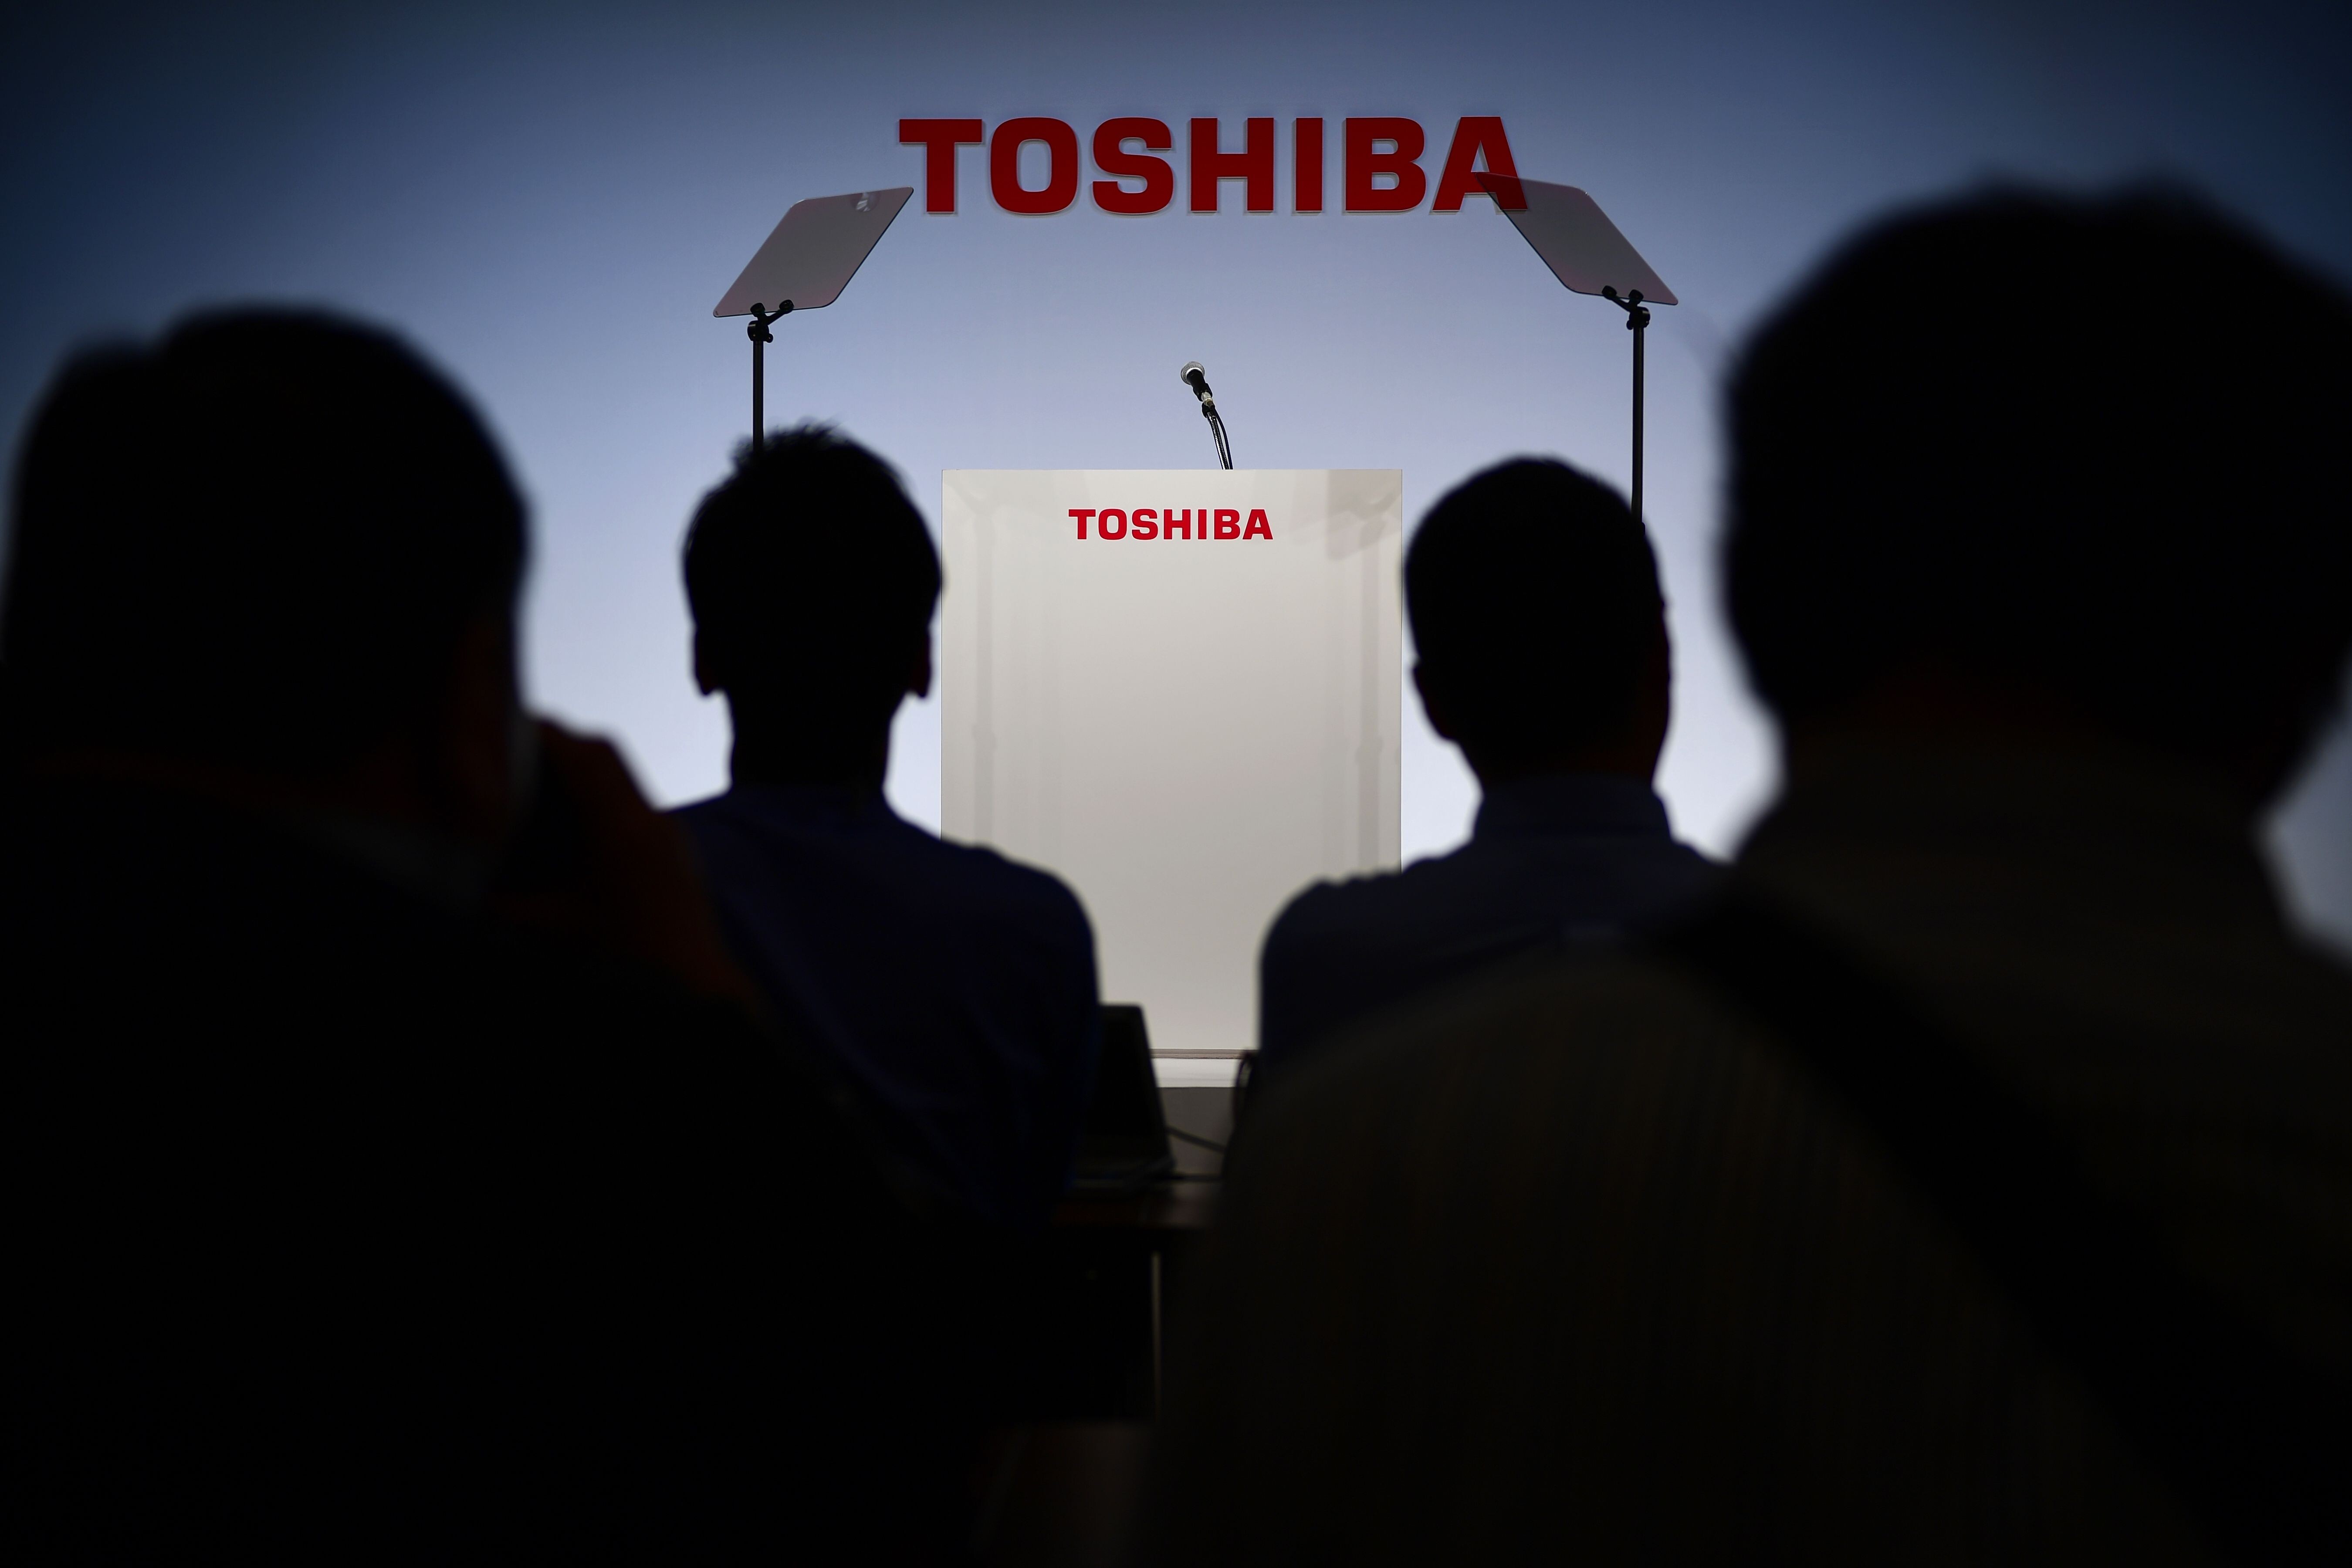 About 650 jobs will be lost when Japan’s Toshiba closes its facility in Dalian, China, this month. Photo: AFP